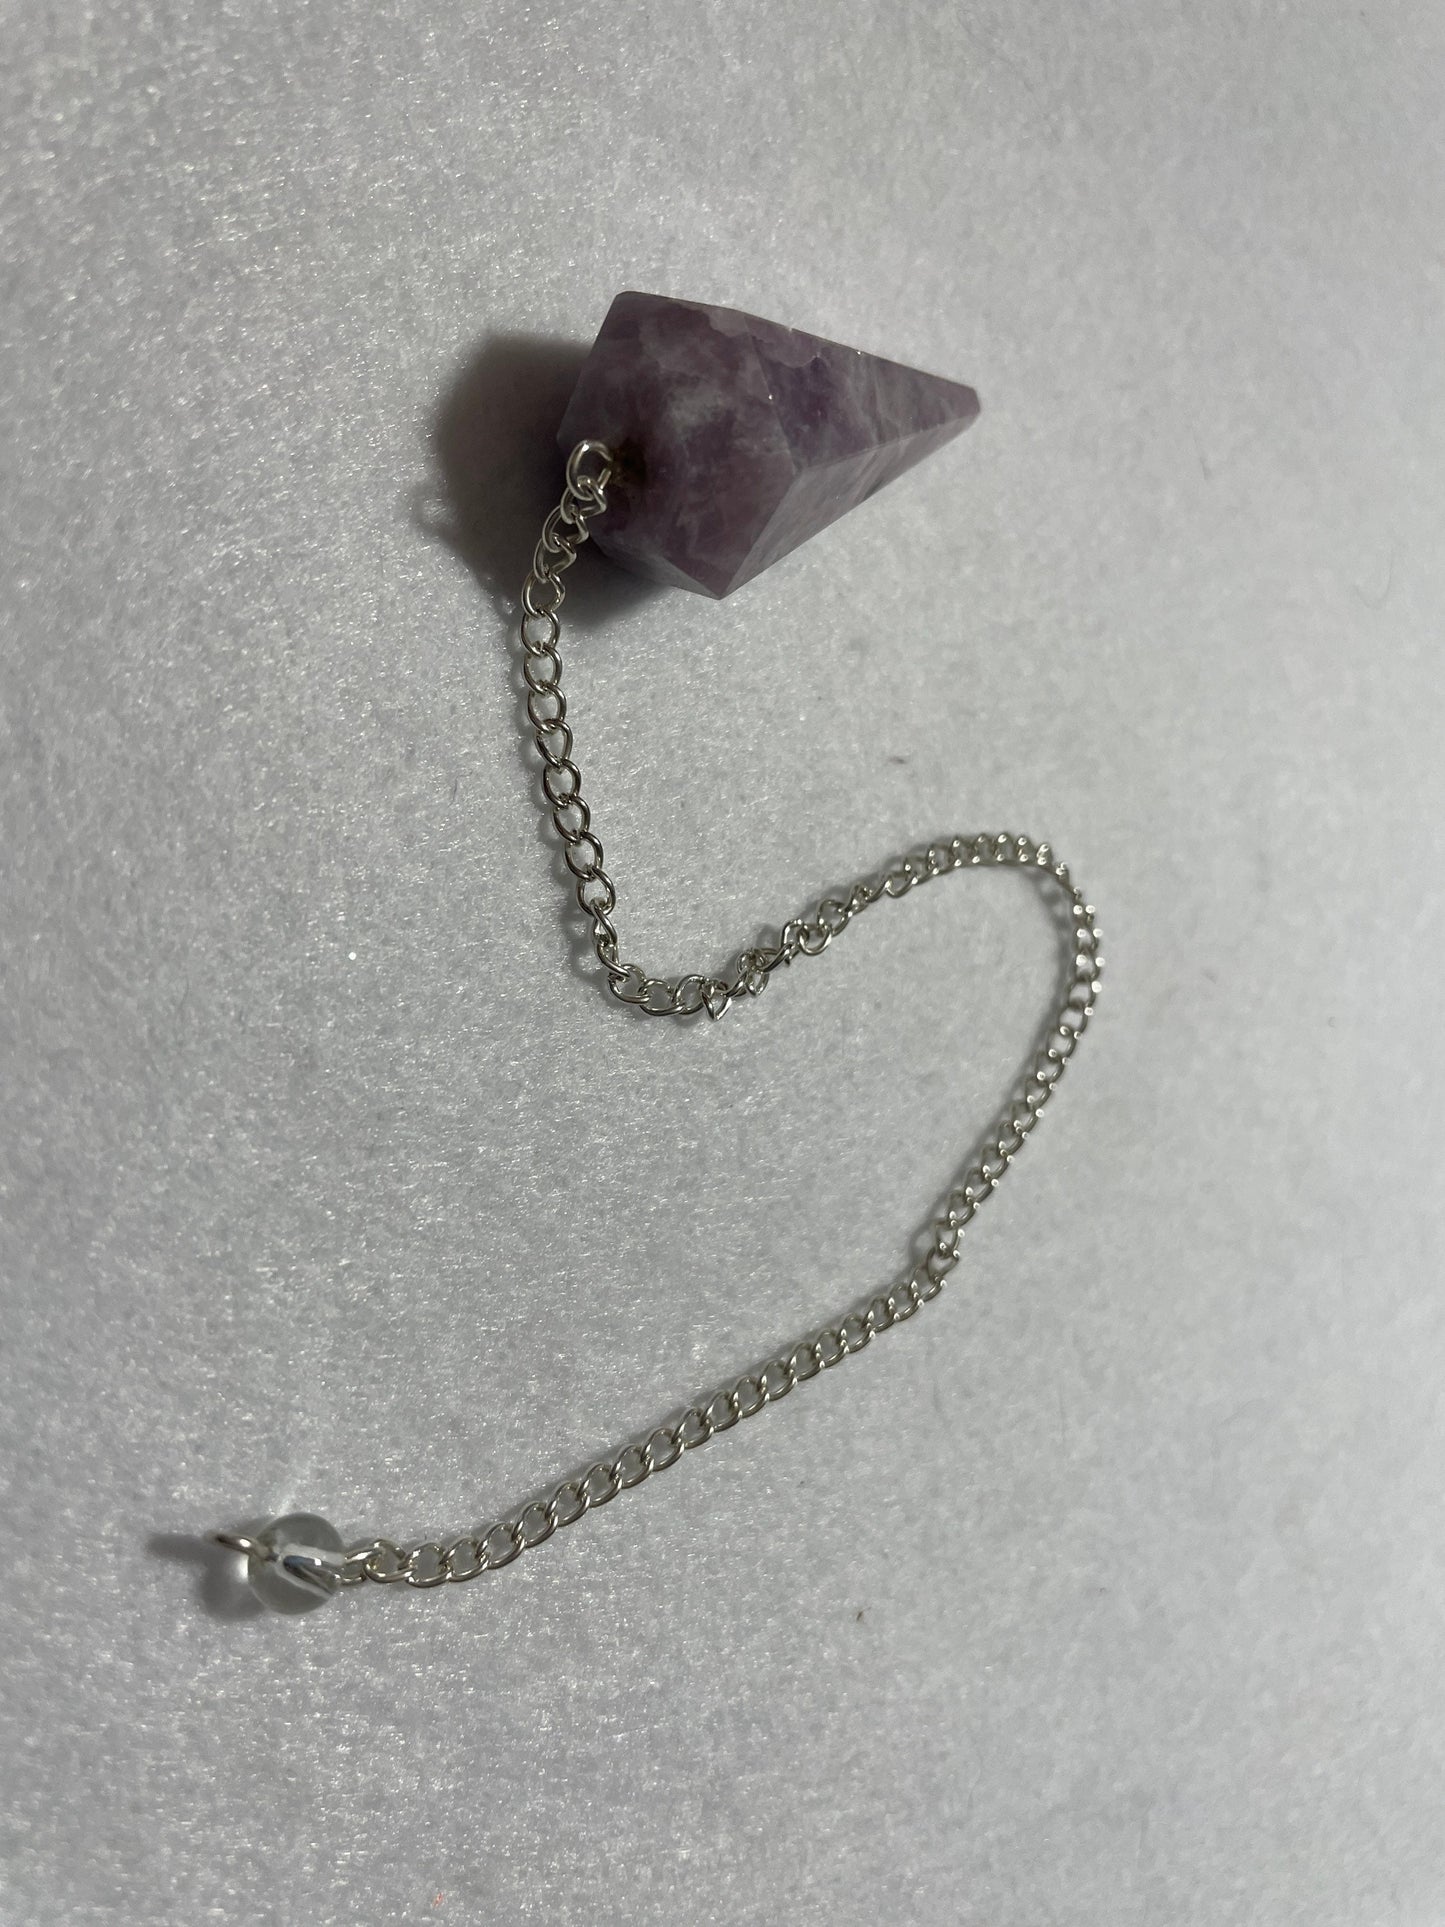 This beautiful Lepidolite Pendulum is  1.65” and with chain is 9”